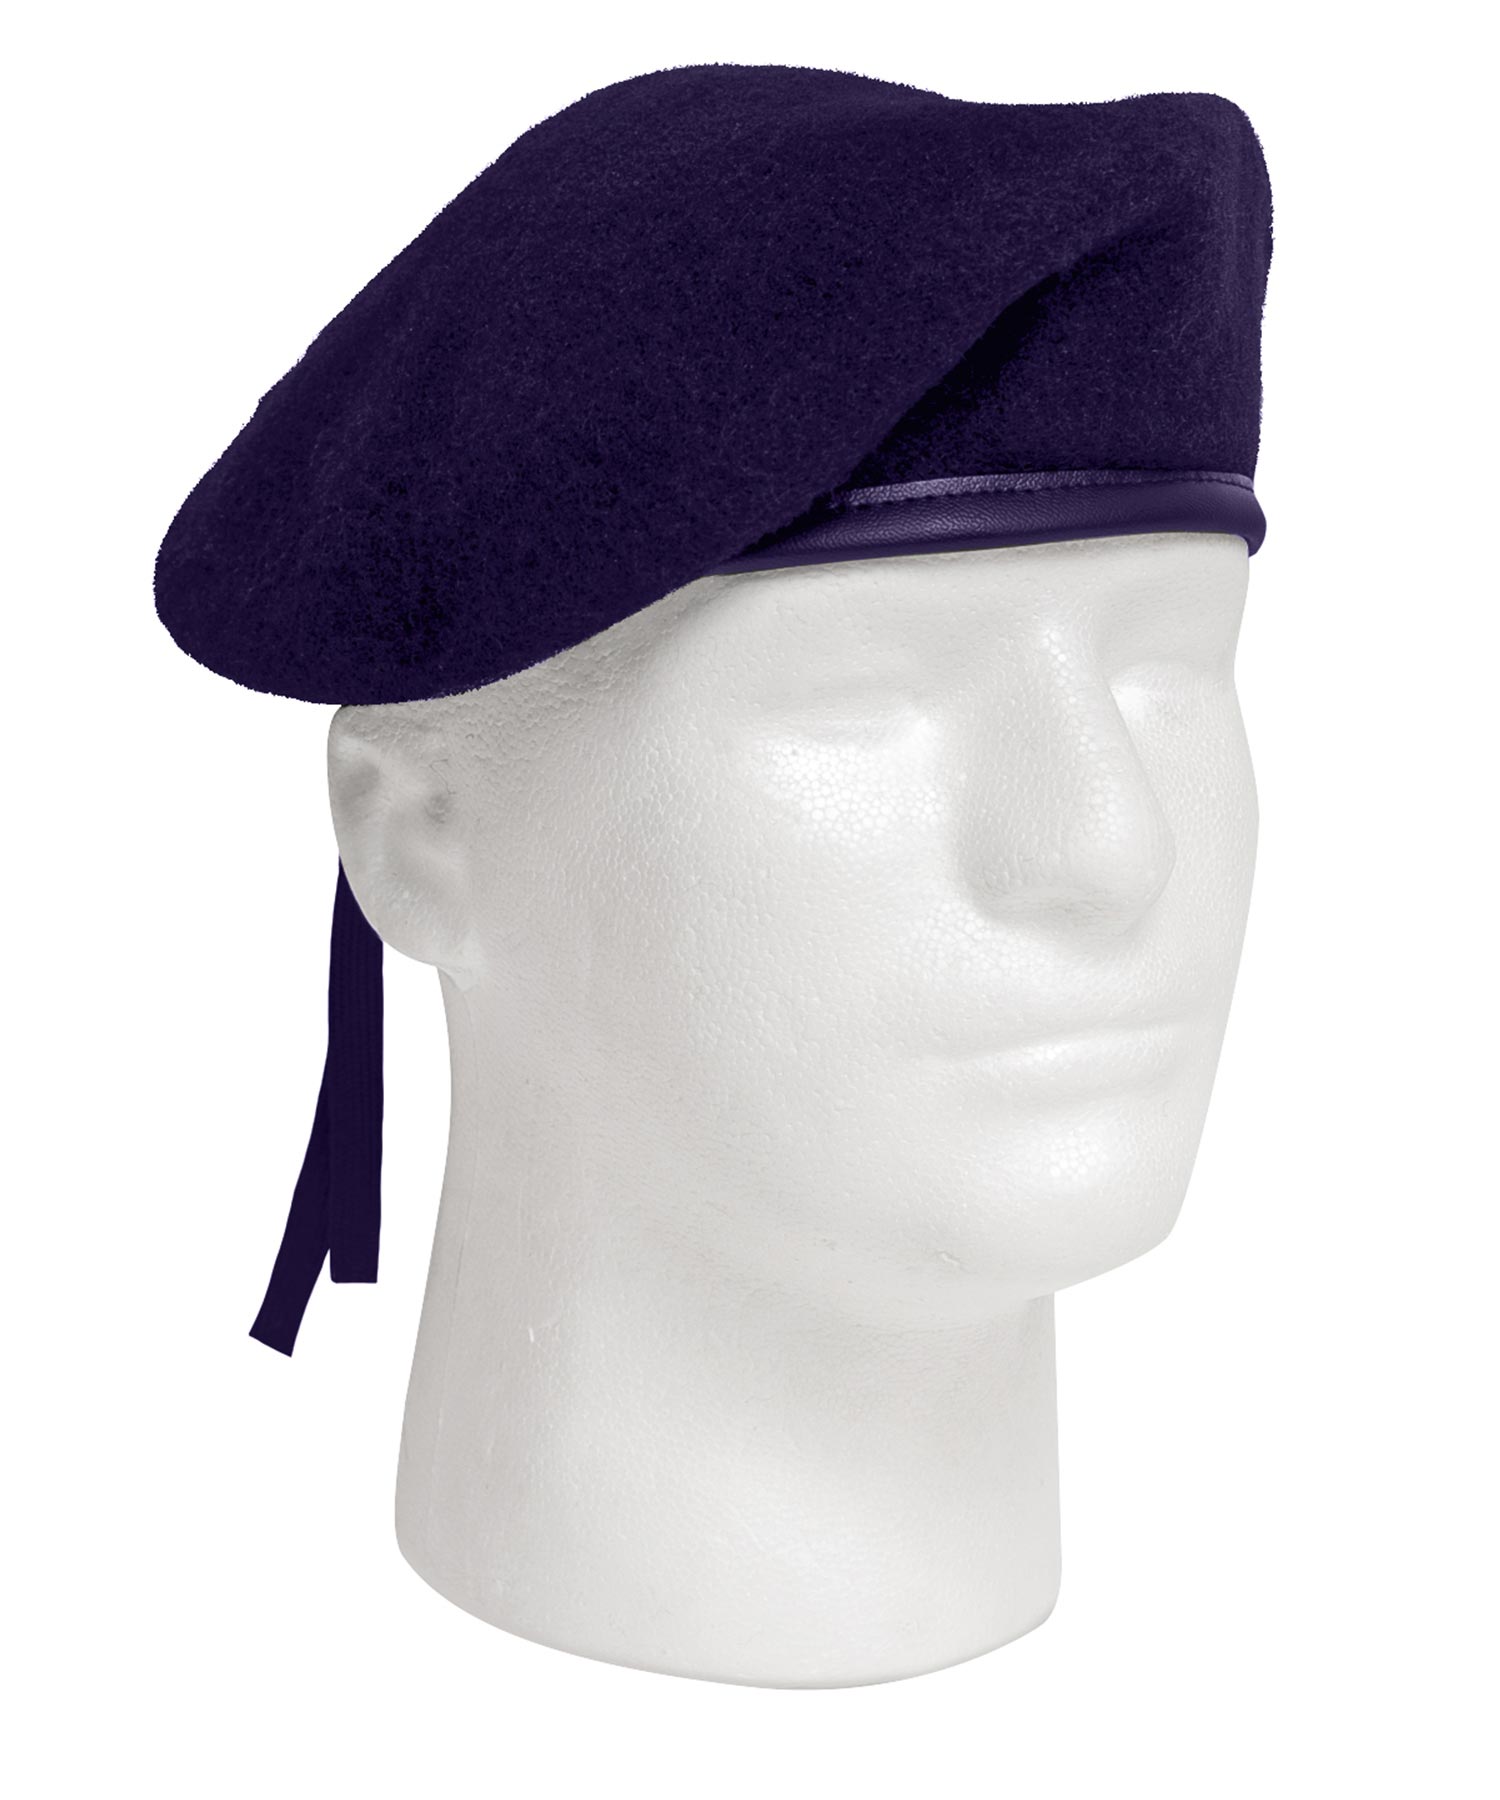 Rothco Regulation Special Forces Berets